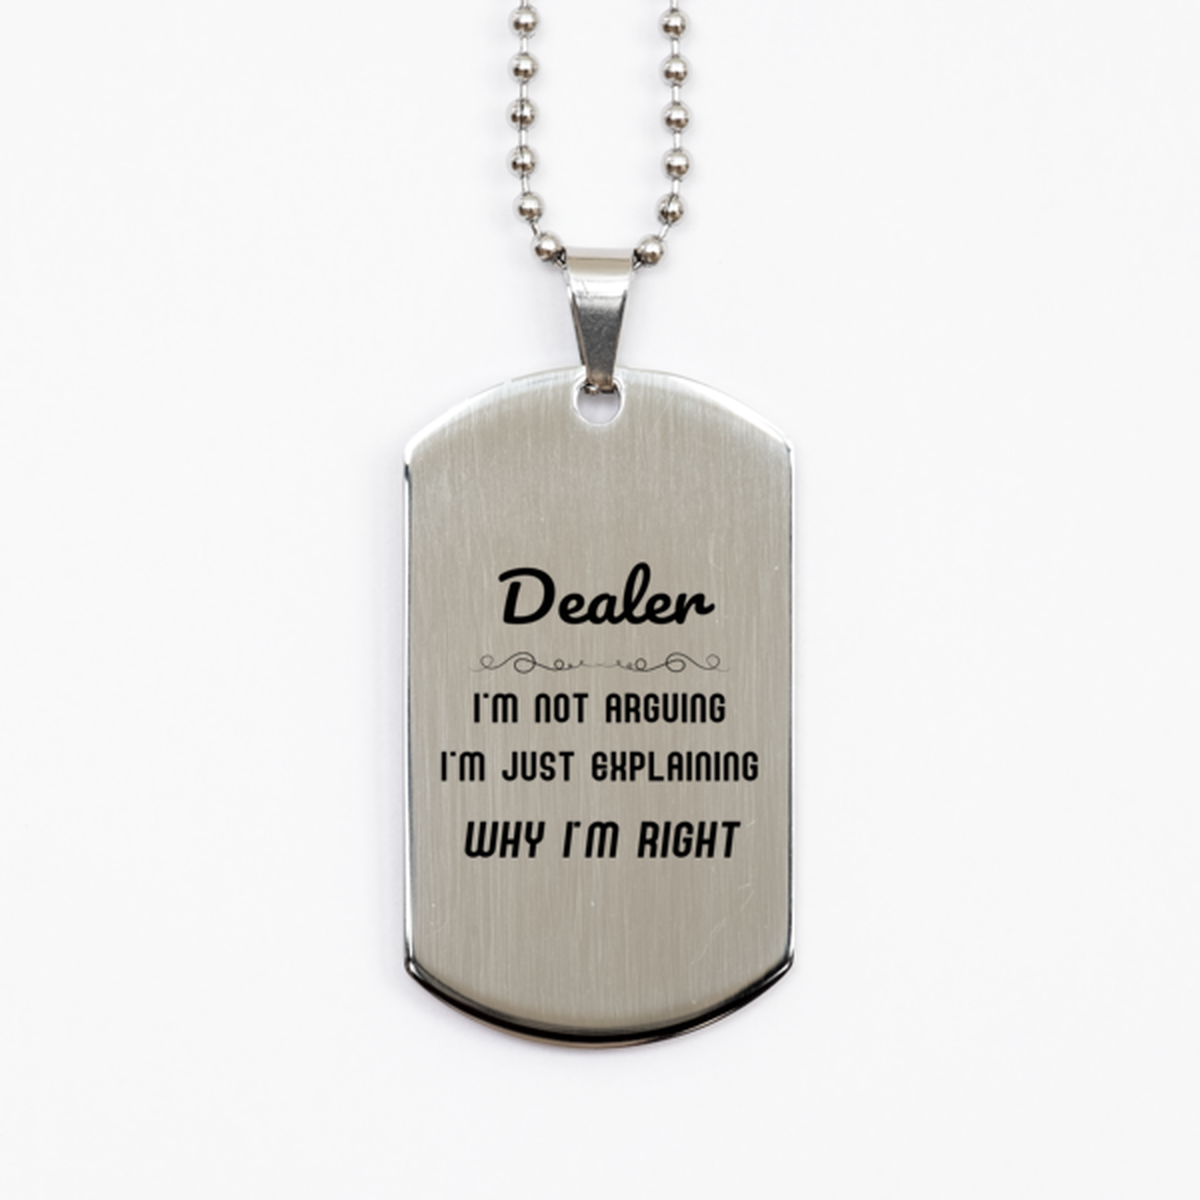 Dealer I'm not Arguing. I'm Just Explaining Why I'm RIGHT Silver Dog Tag, Funny Saying Quote Dealer Gifts For Dealer Graduation Birthday Christmas Gifts for Men Women Coworker